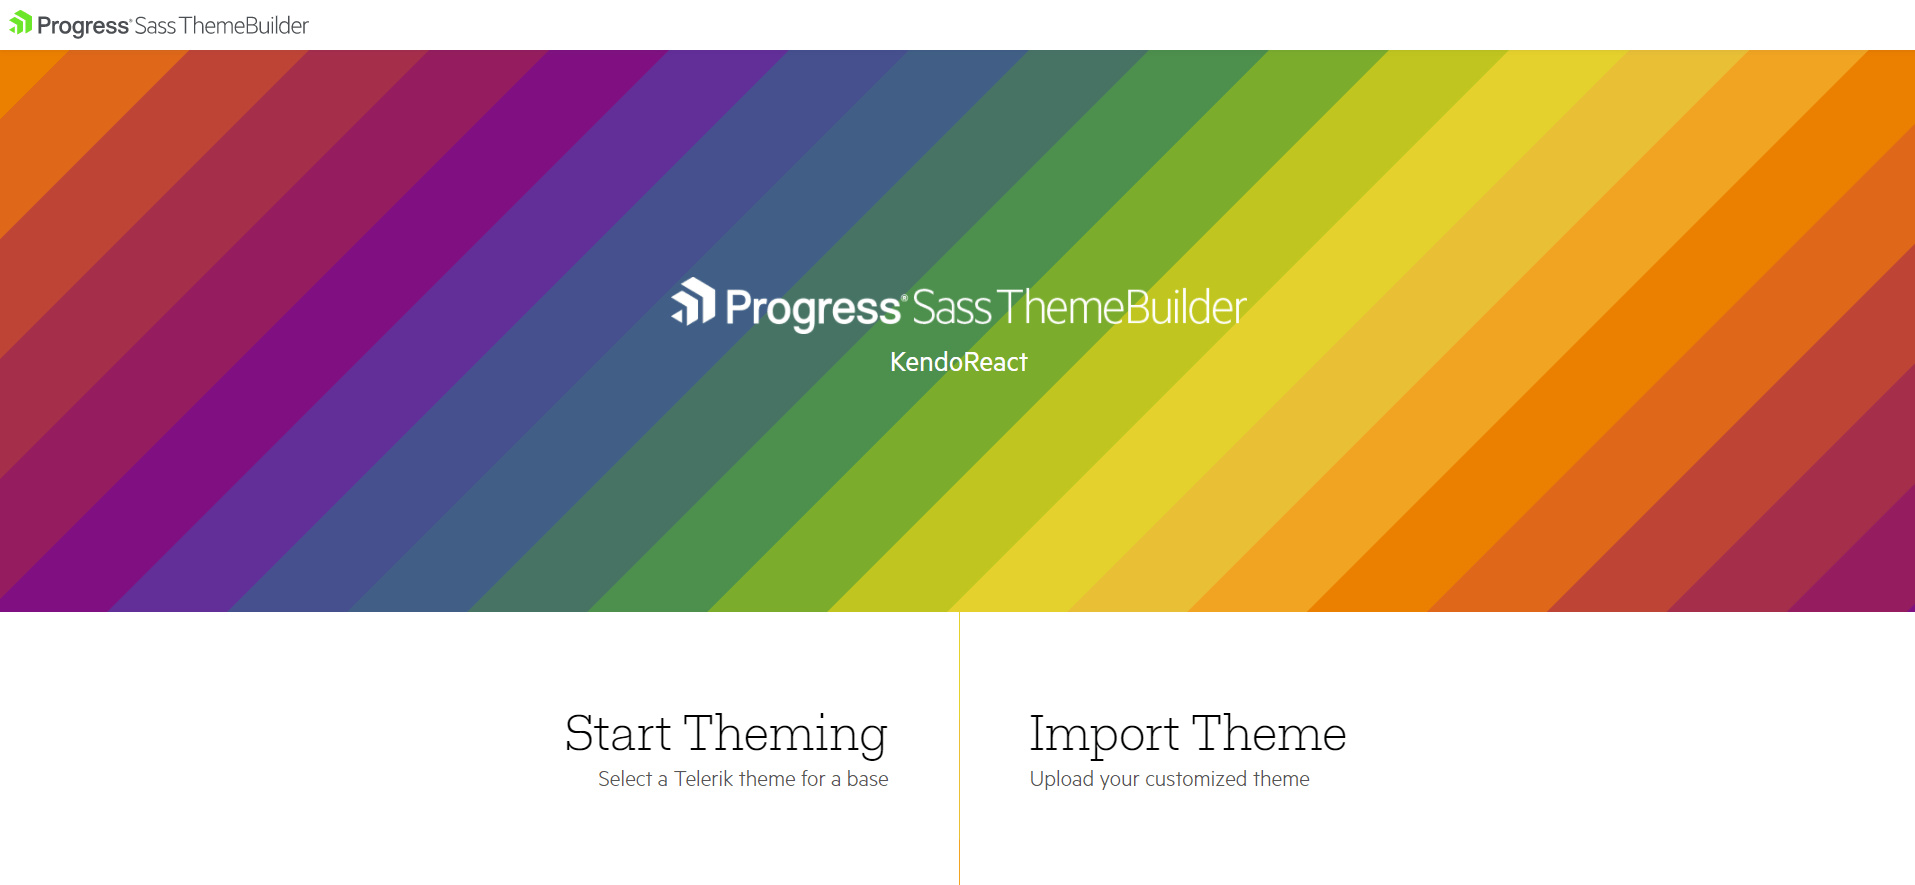 Progress Sass Theme Builder page. We're in KendoReact, with options to Start Theming (select a Telerik them for a base) or to Import Theme (Upload your customized theme).